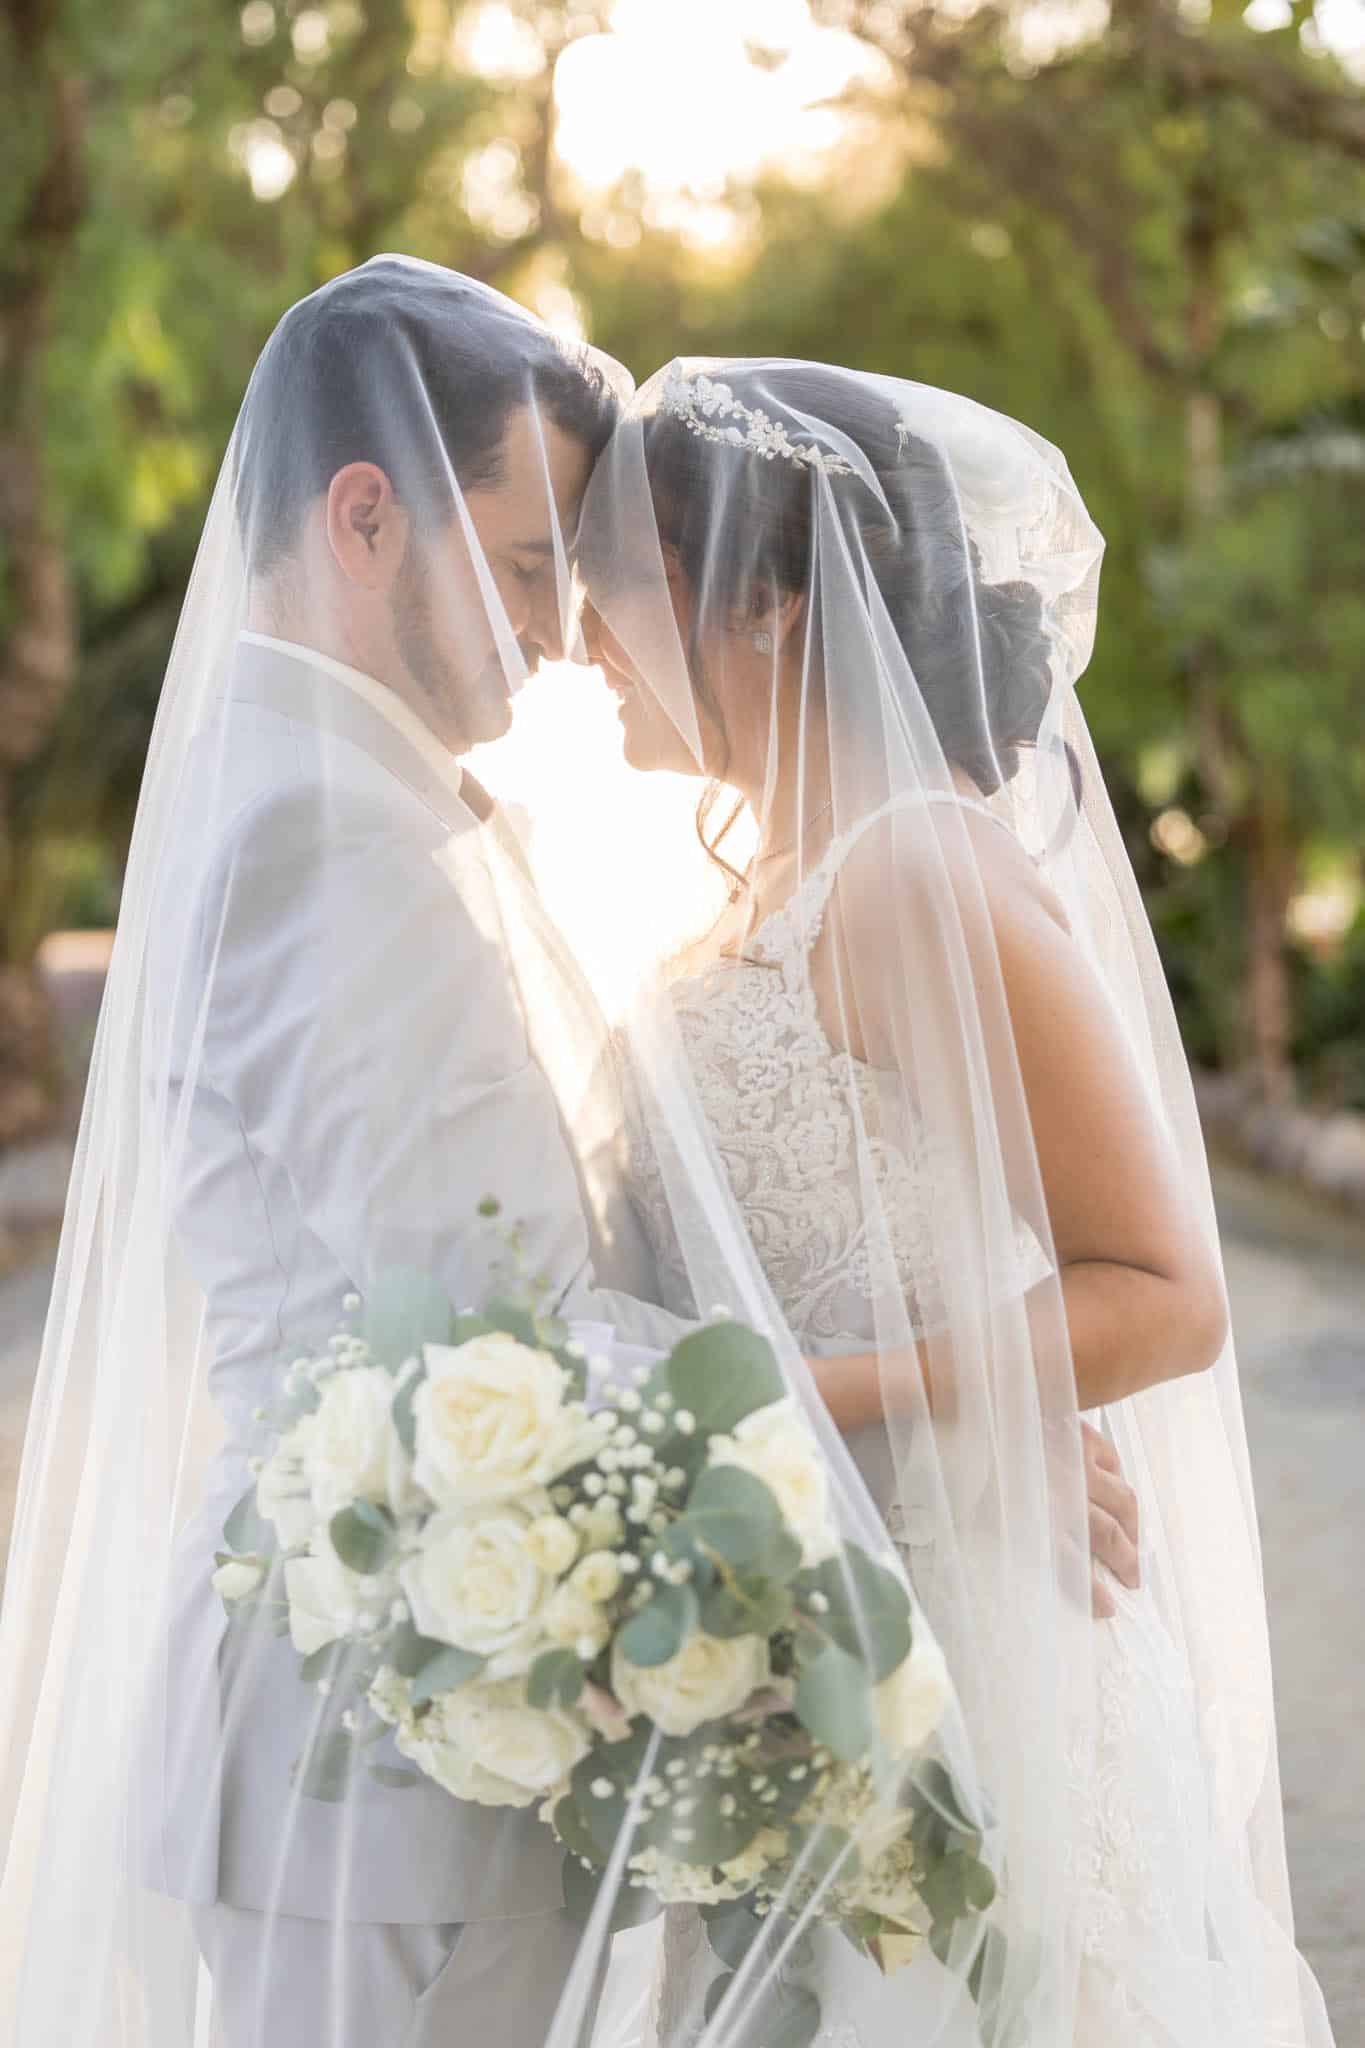 sun shing through the brides wedding veil as it drapes over both the bride and groom as they embrace one another taken by Ventura wedding photographer